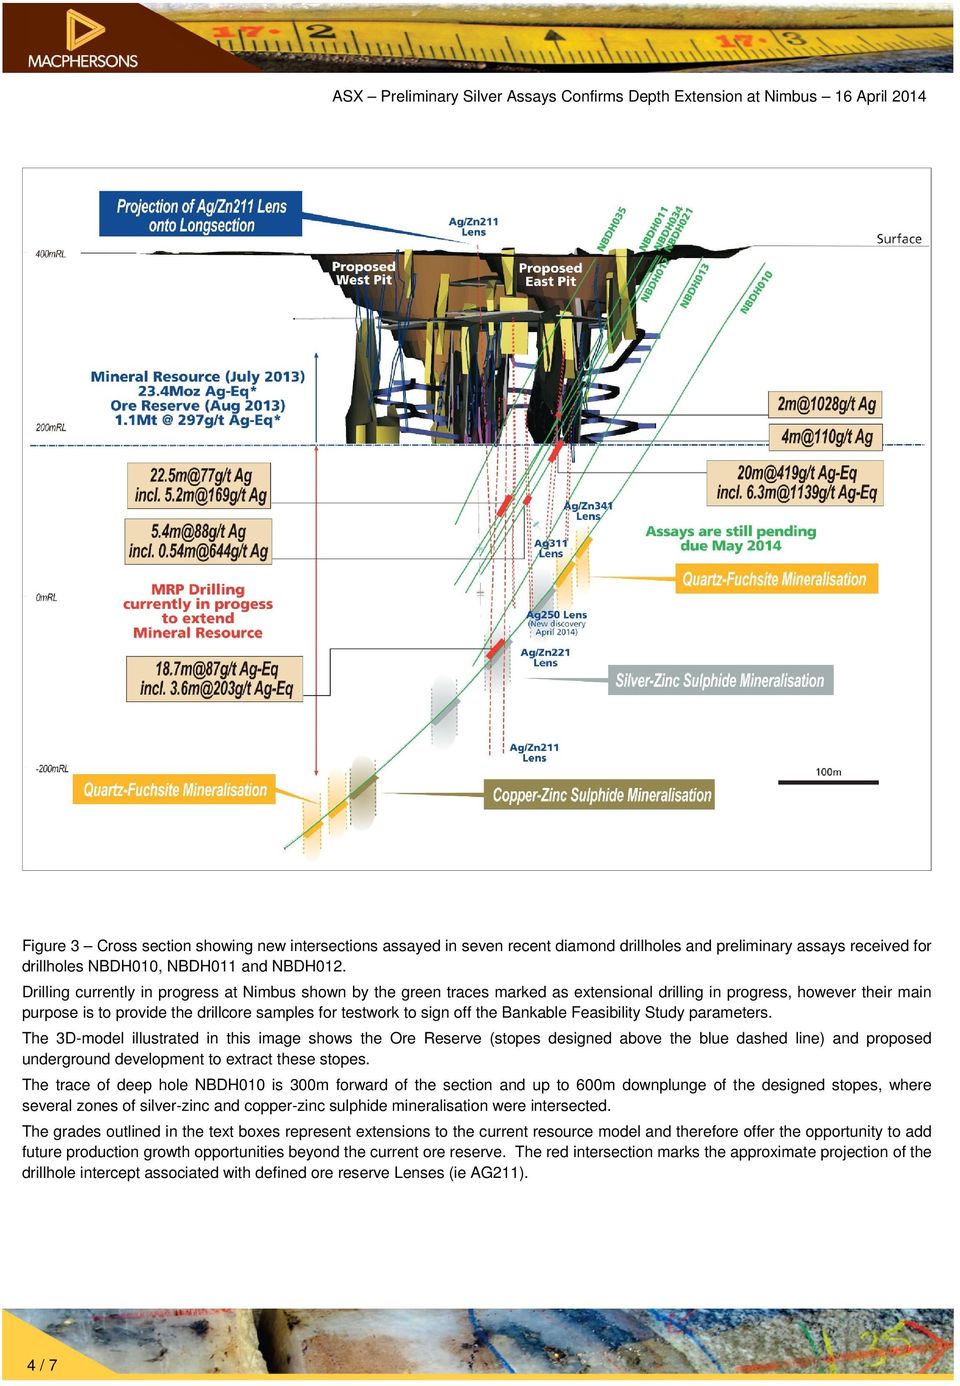 Drilling currently in progress at Nimbus shown by the green traces marked as extensional drilling in progress, however their main purpose is to provide the drillcore samples for testwork to sign off